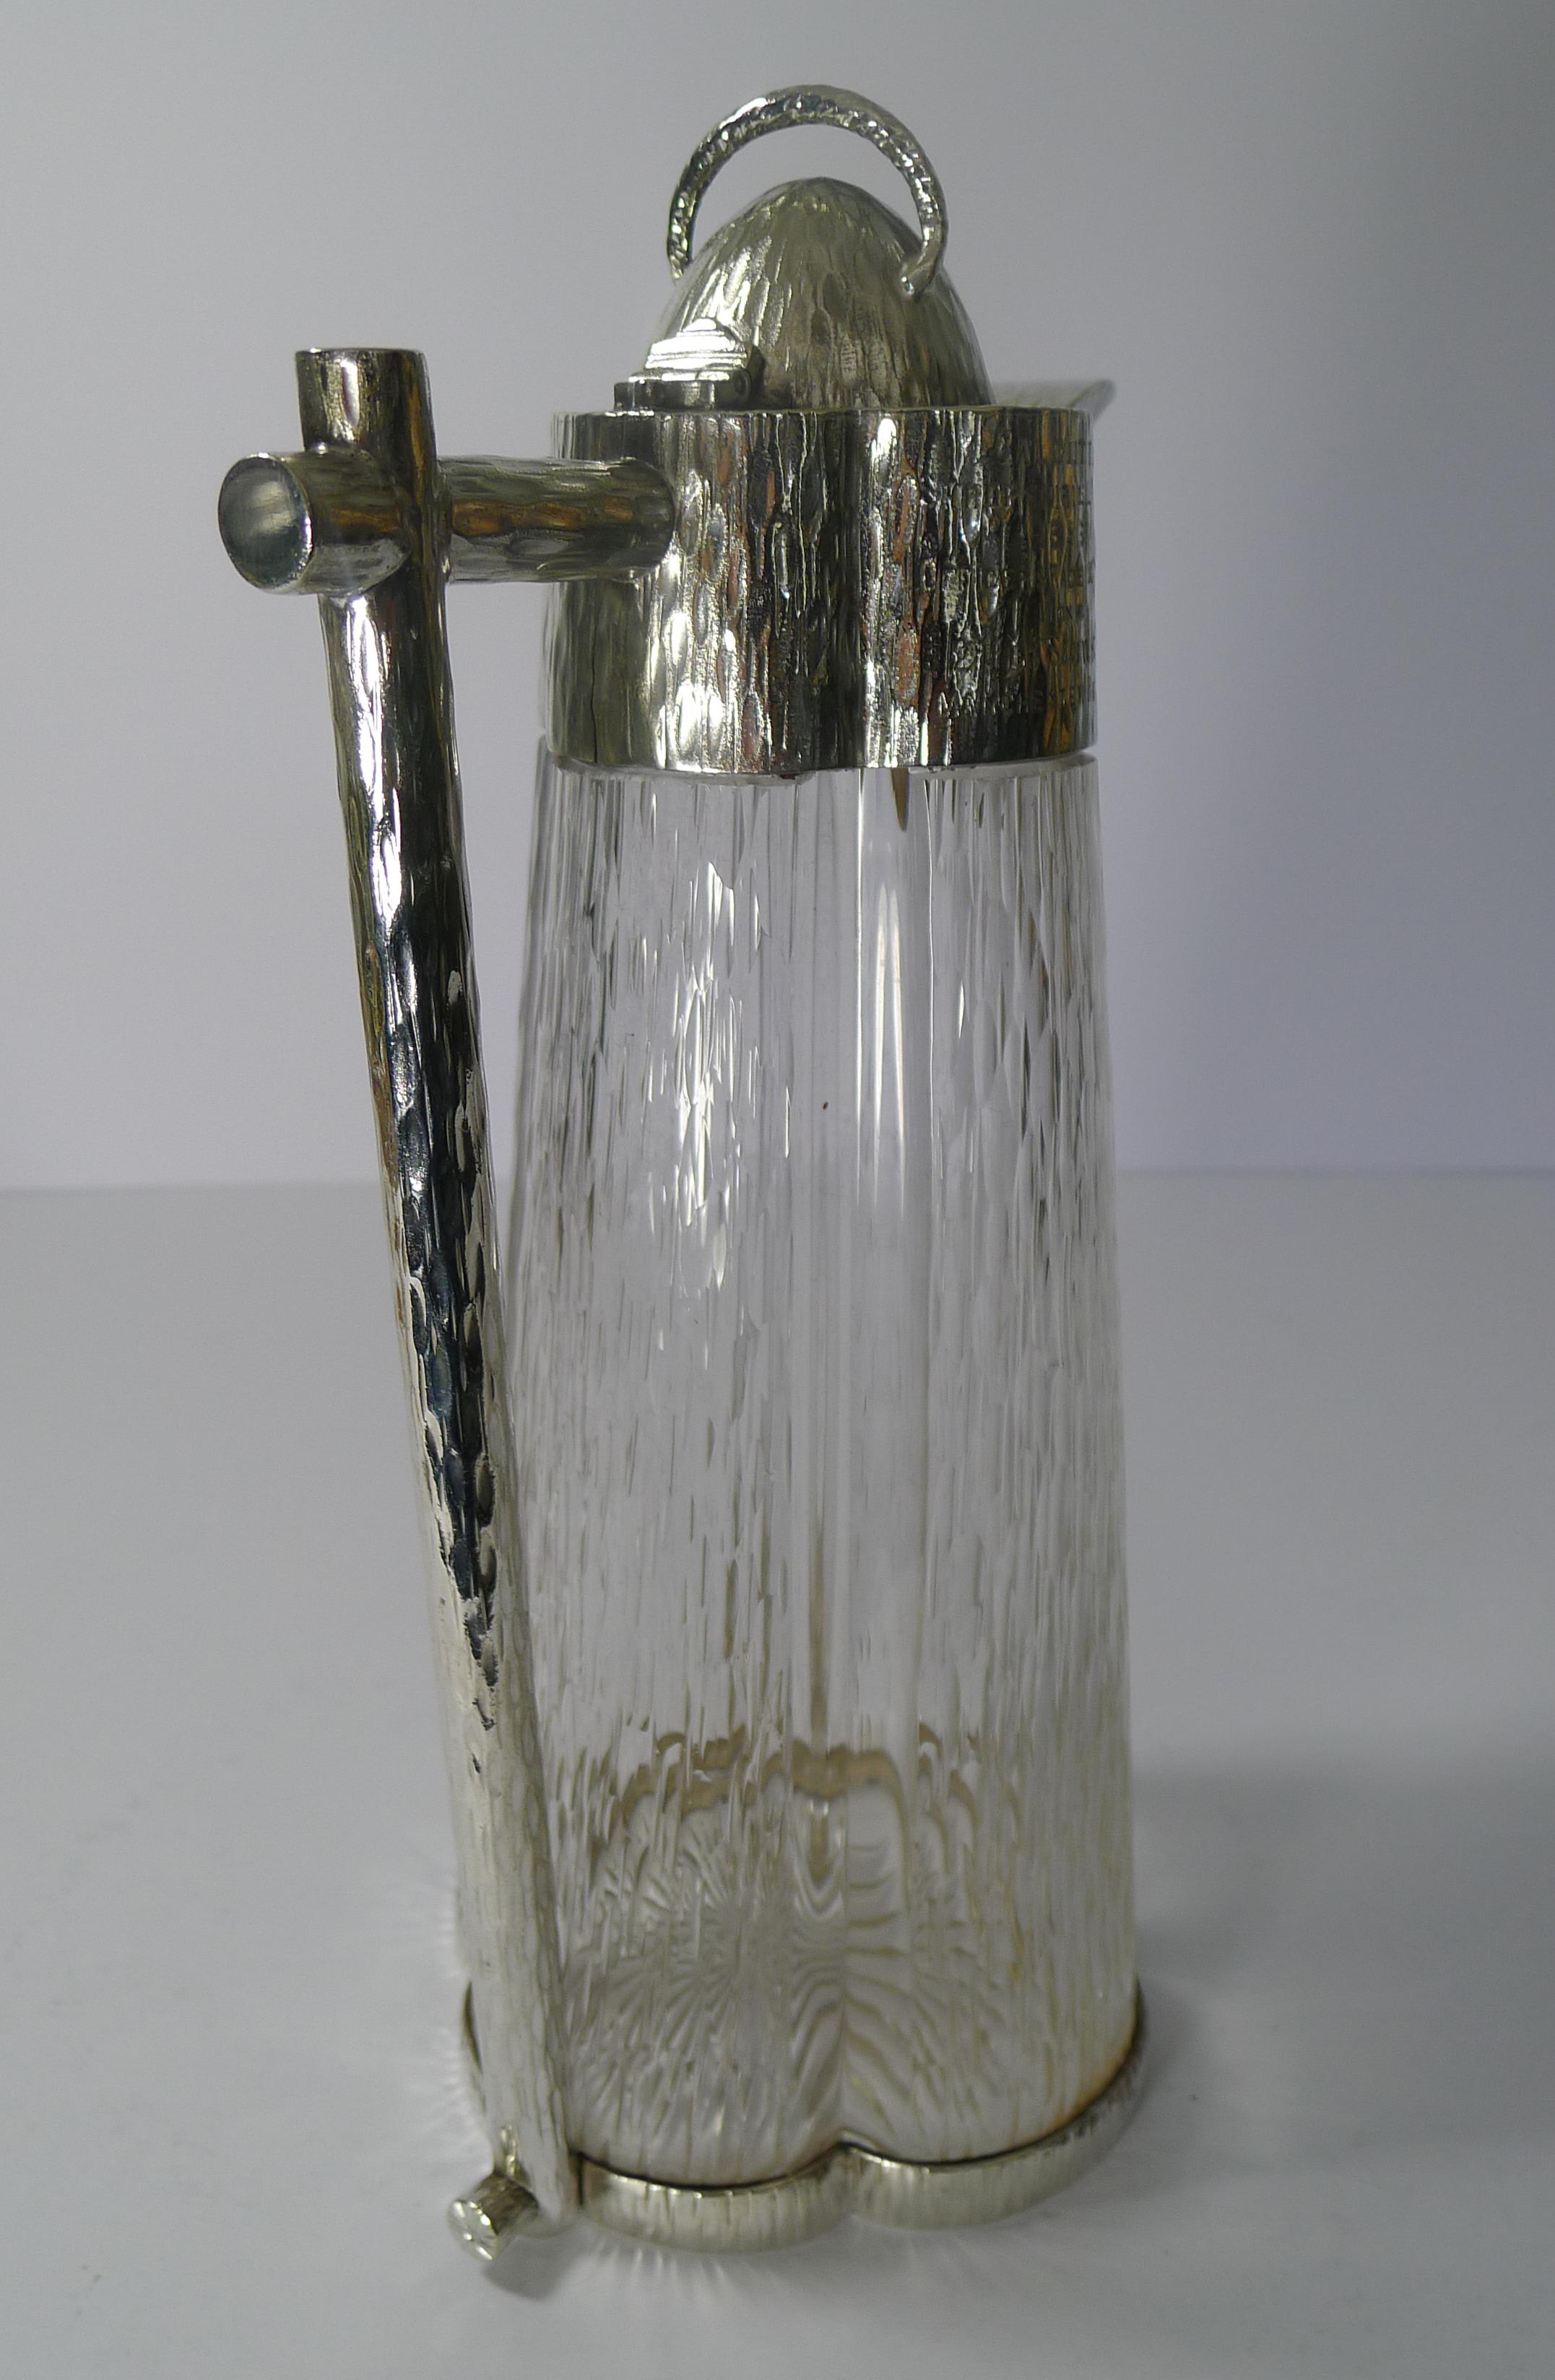 Late 19th Century Outstanding Claret Jug in the Manner of Christopher Dresser, 1893